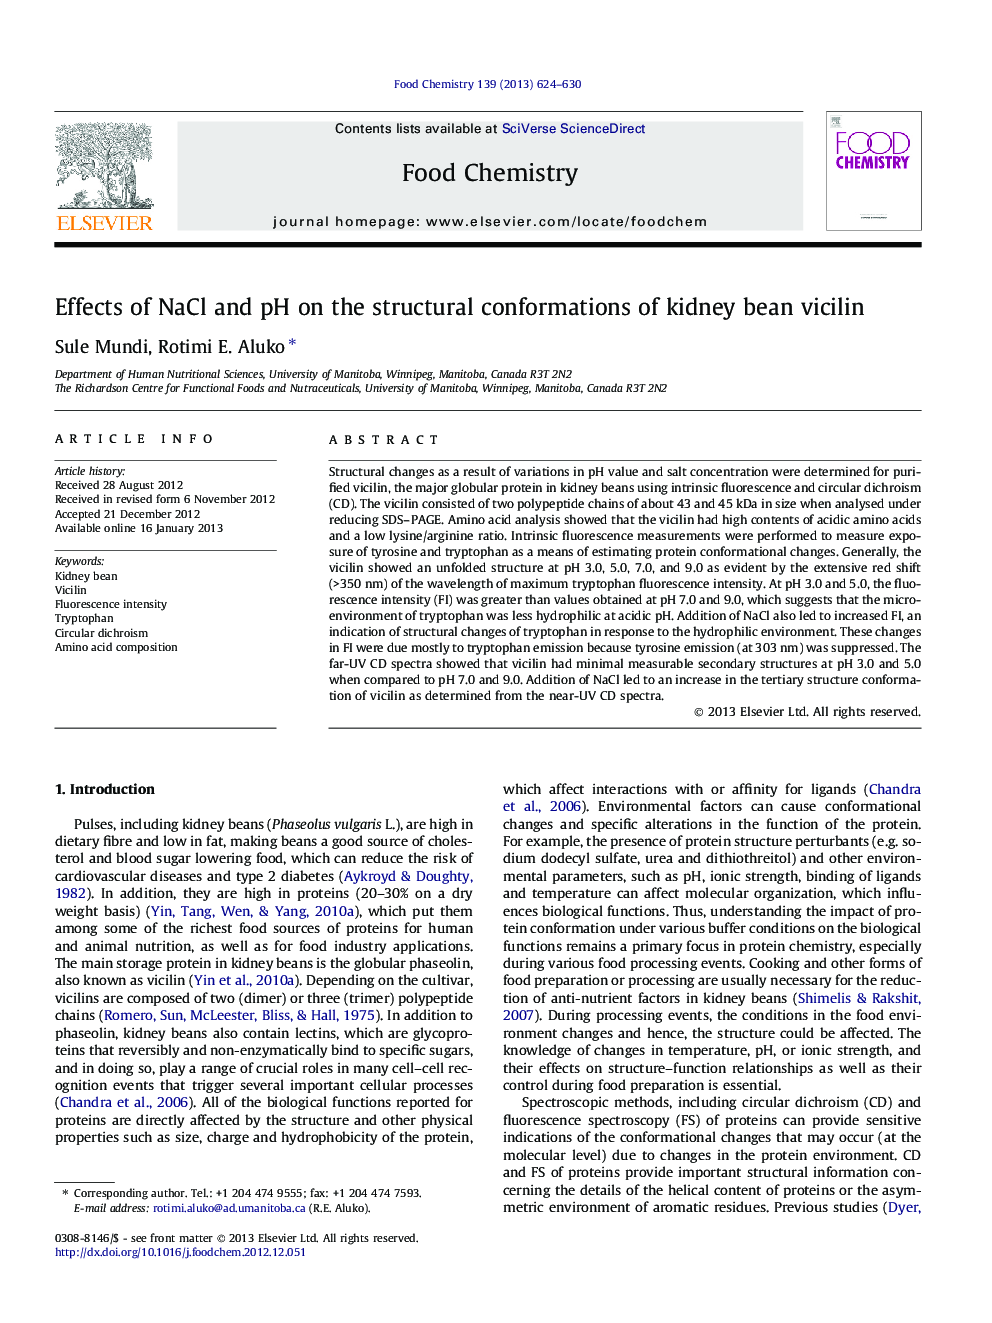 Effects of NaCl and pH on the structural conformations of kidney bean vicilin